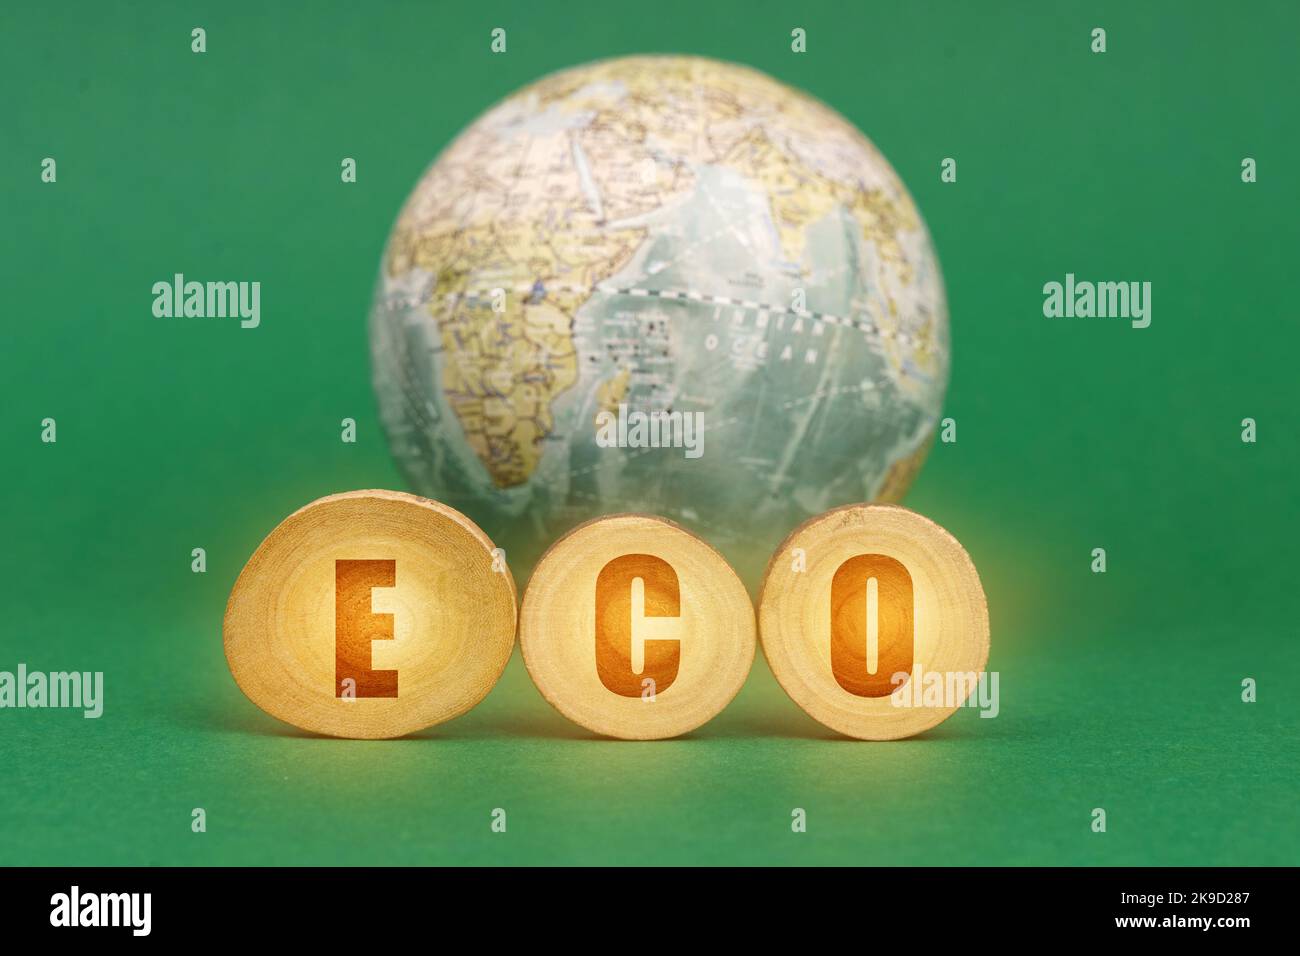 Ecological concept. On a green background, a globe and wooden circles with the inscription - ECO Stock Photo